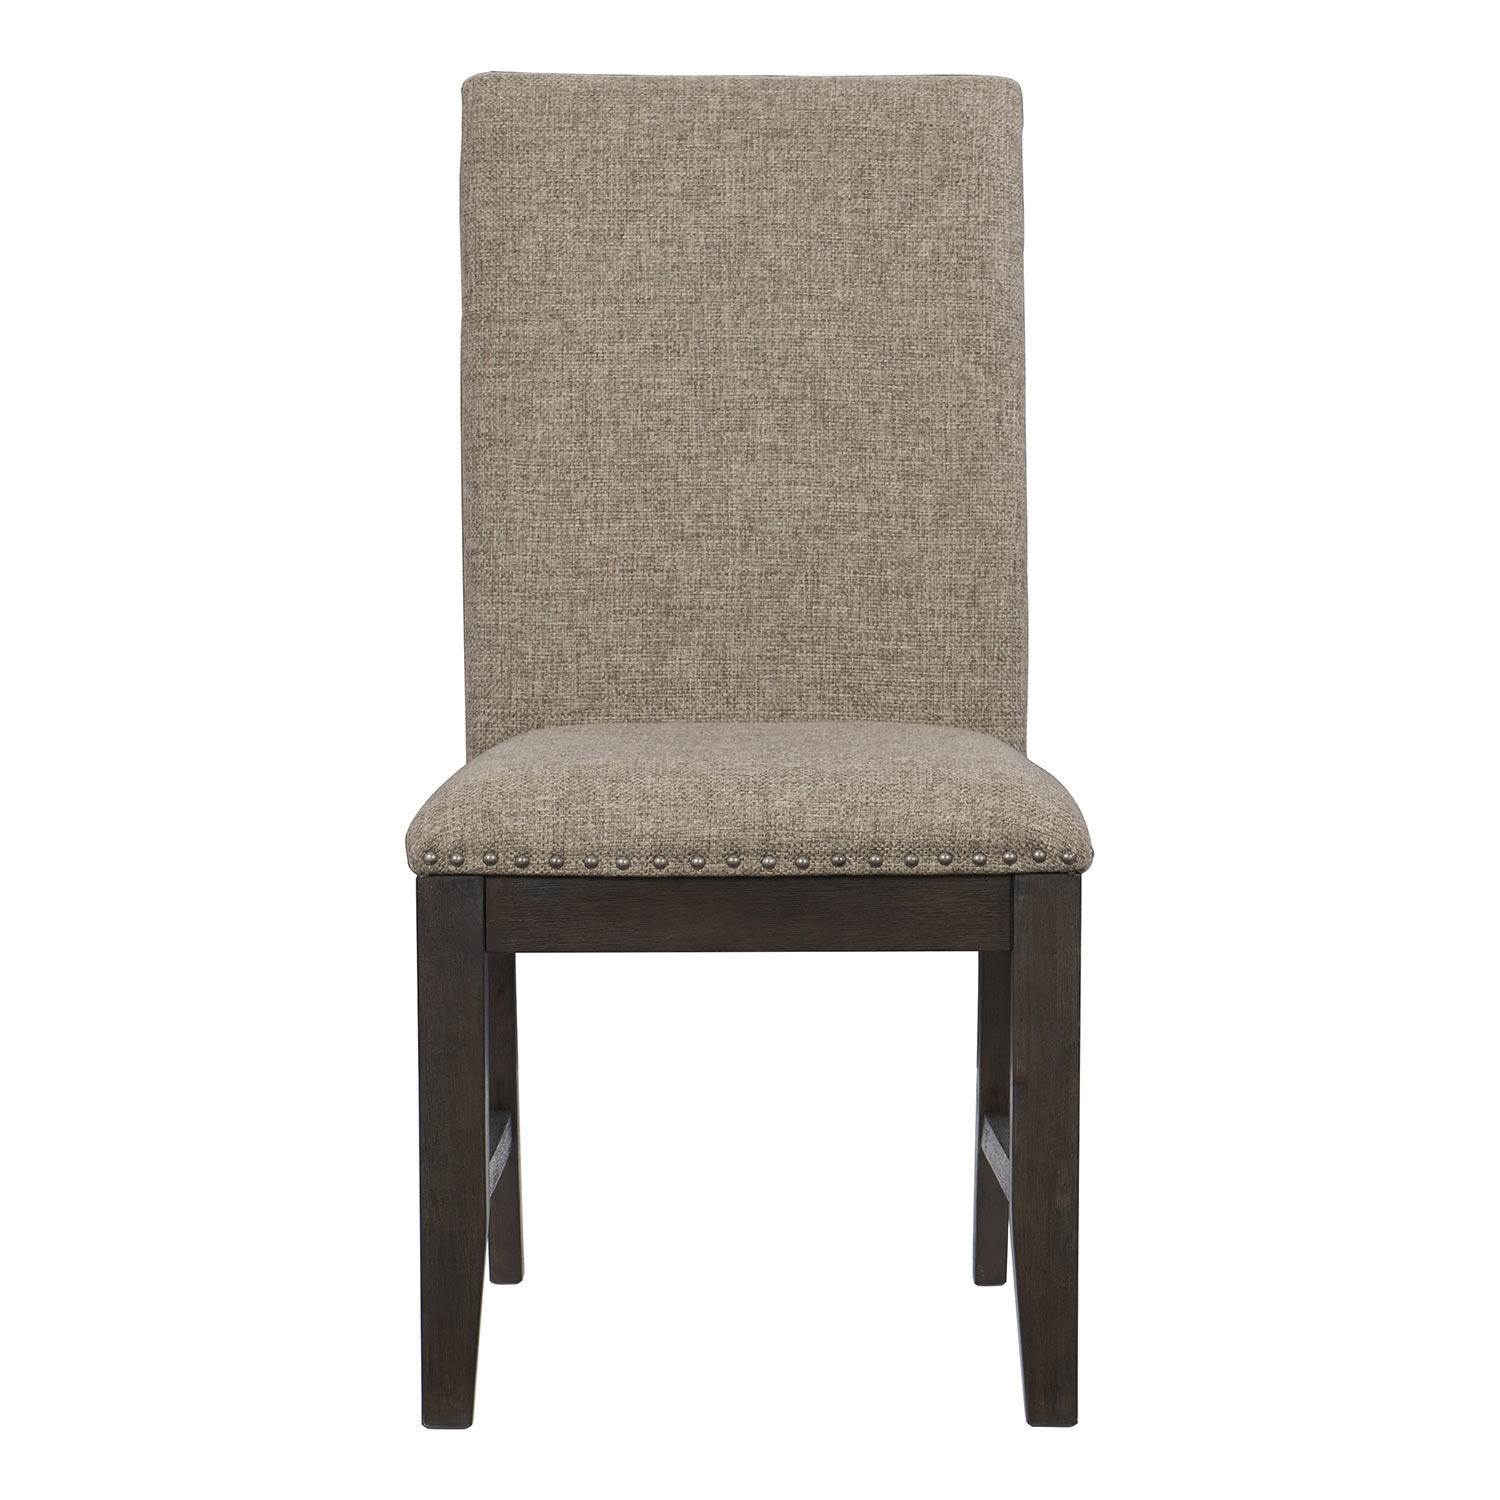 Homelegance Southlake Side Chair - Wire-brushed Rustic Brown